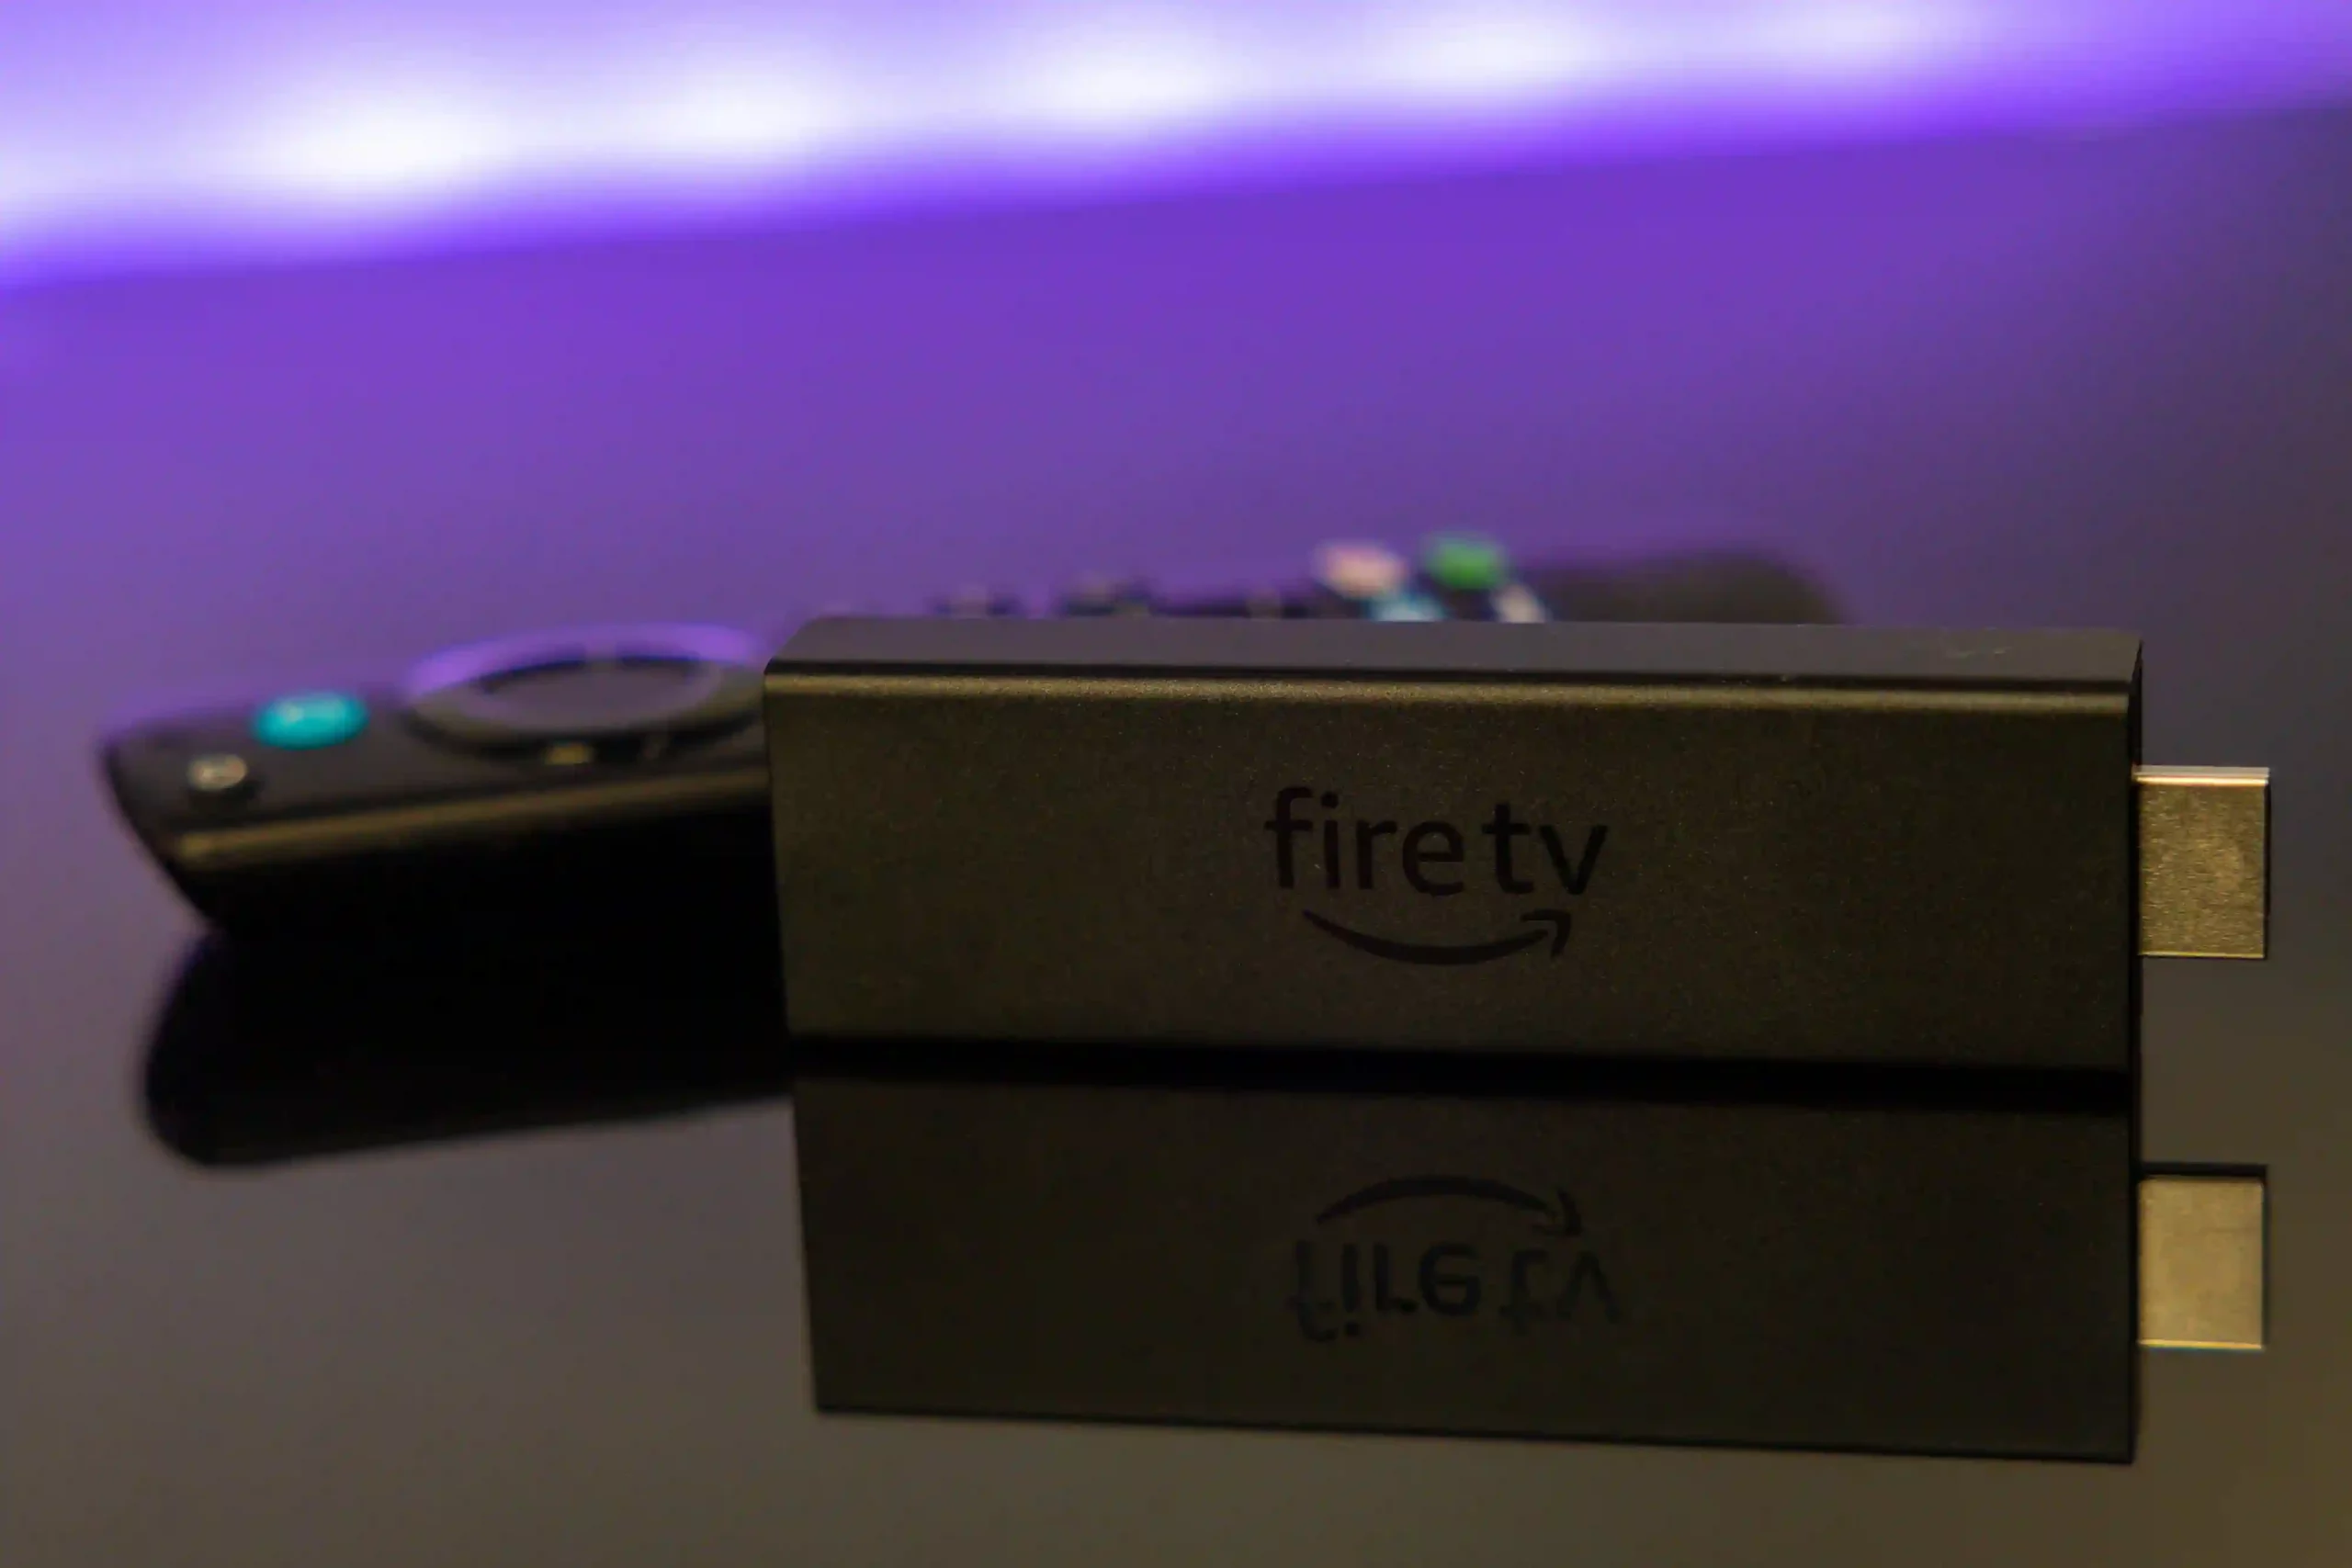 What Is The Best Internet Speed For Streaming on Firestick?